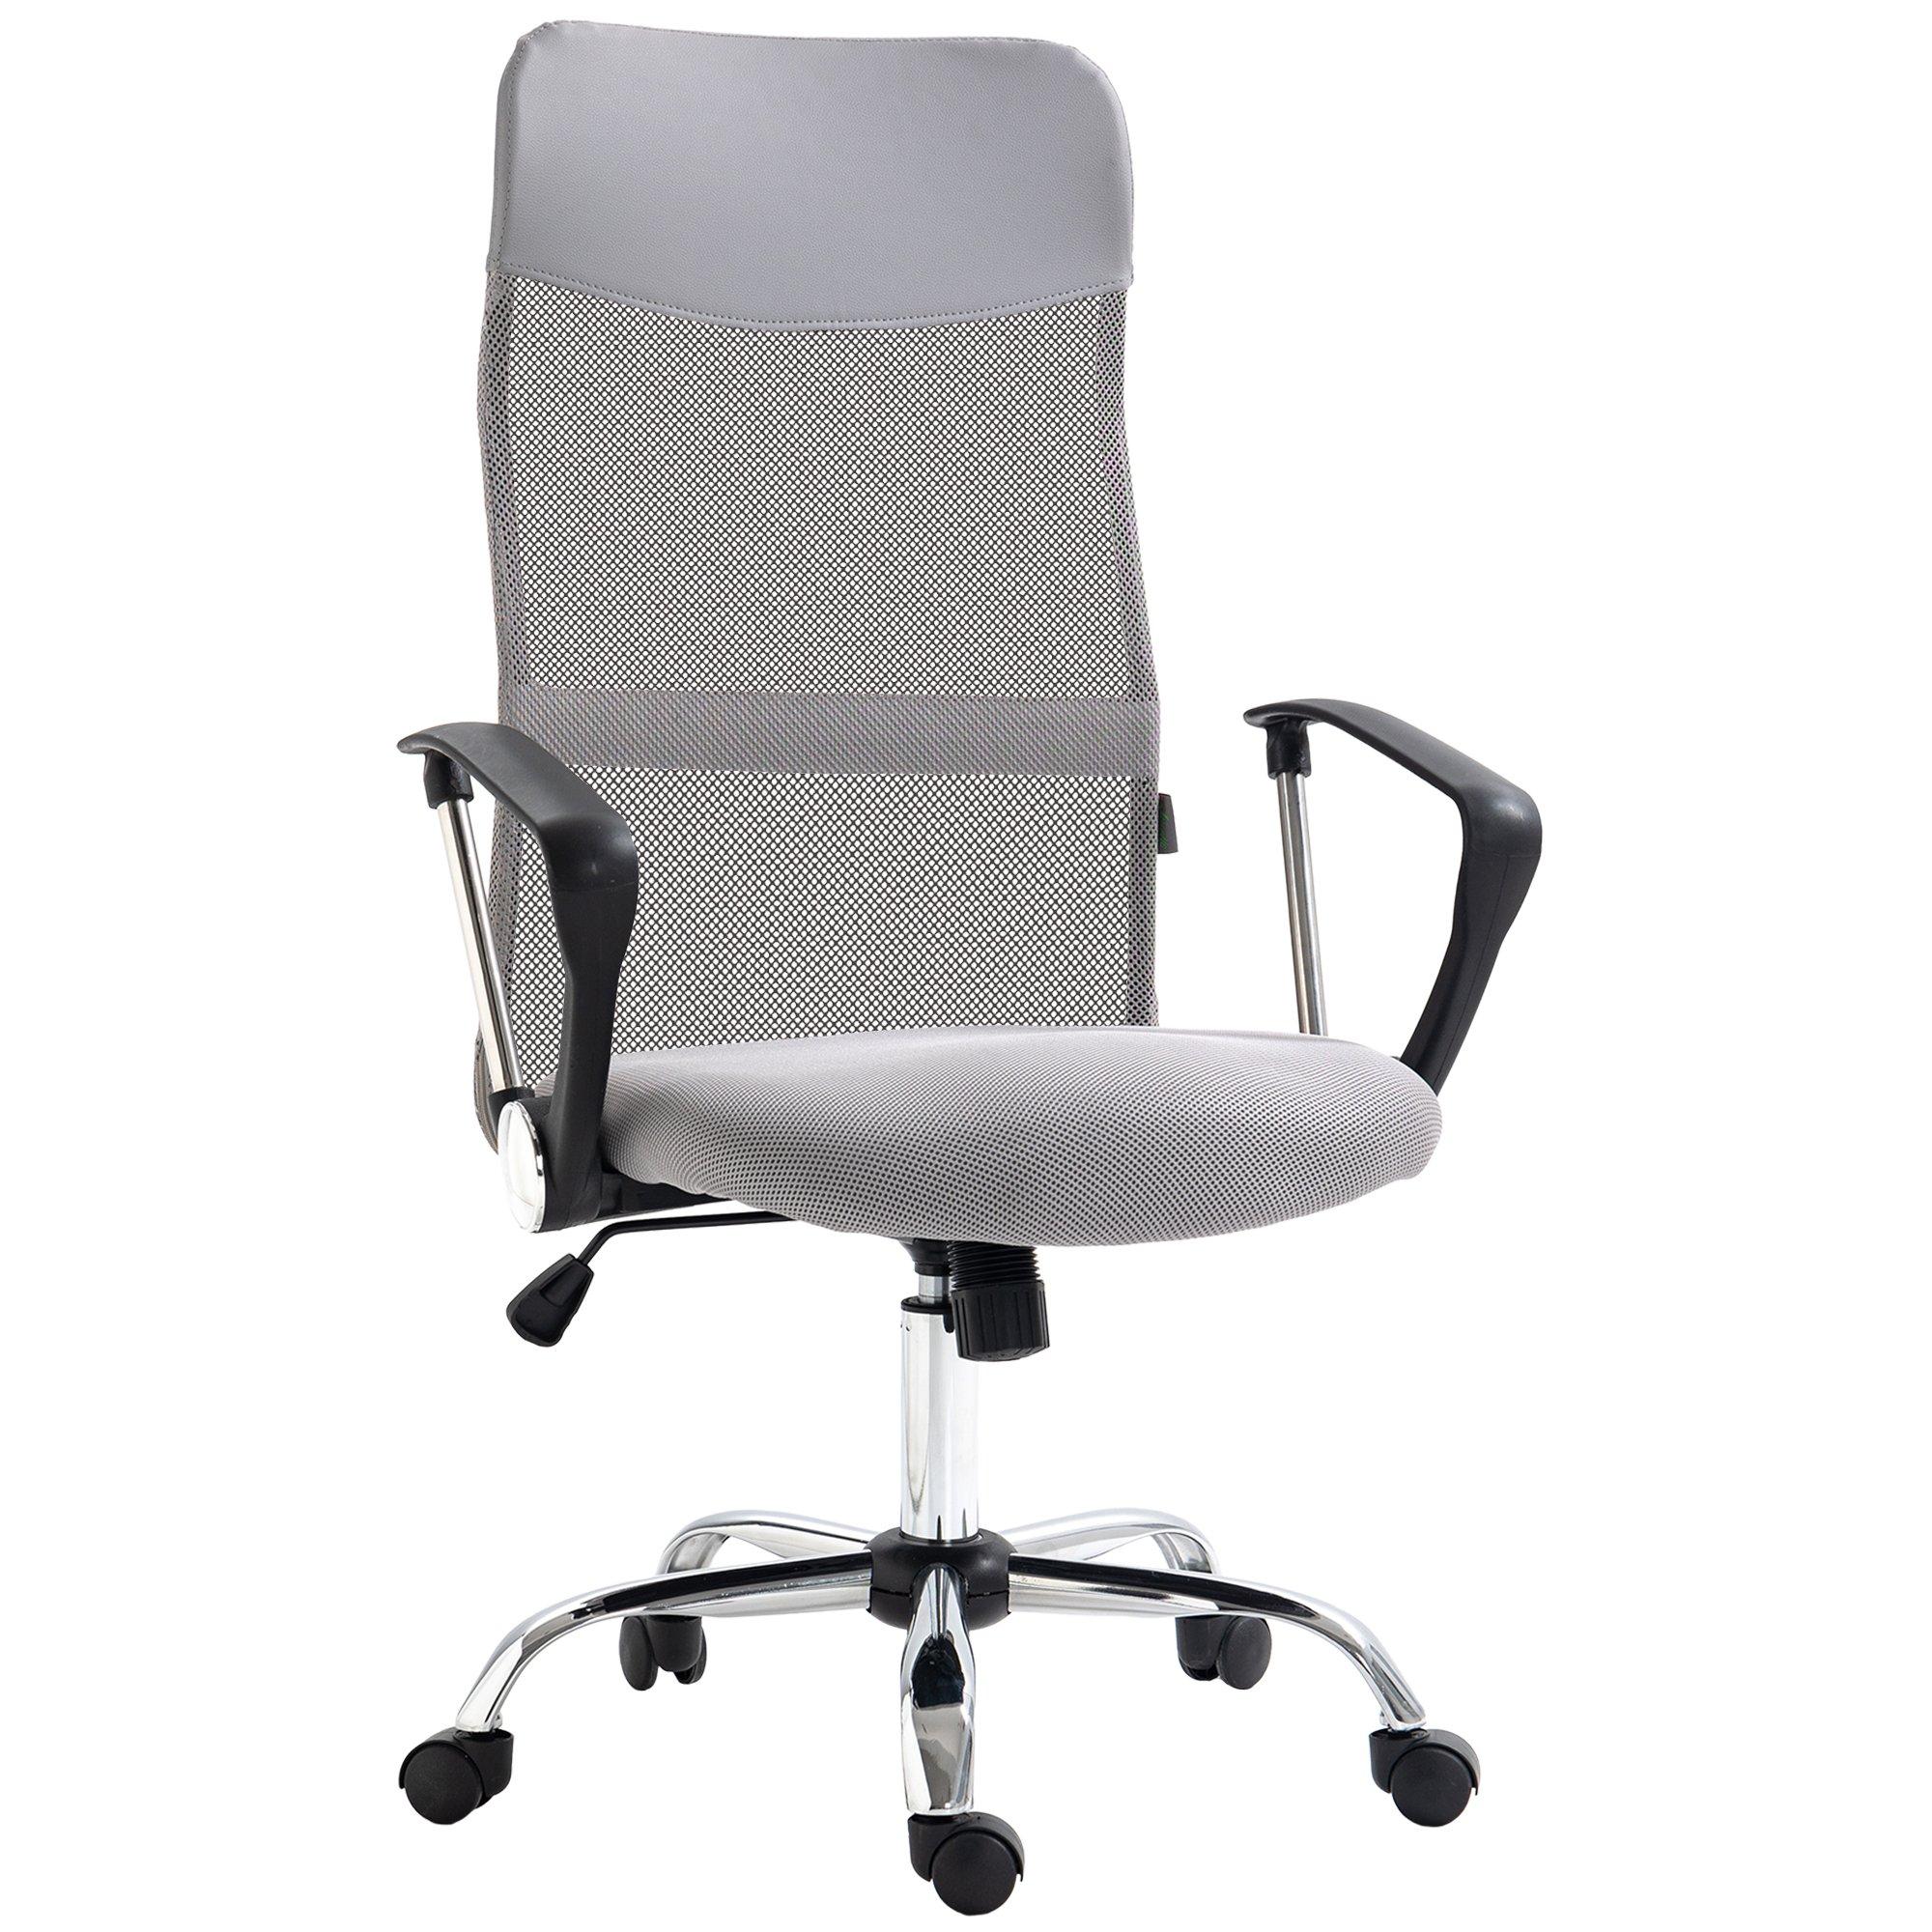 Executive Office Chair High Back Mesh Chair Seat Office Desk Chairs